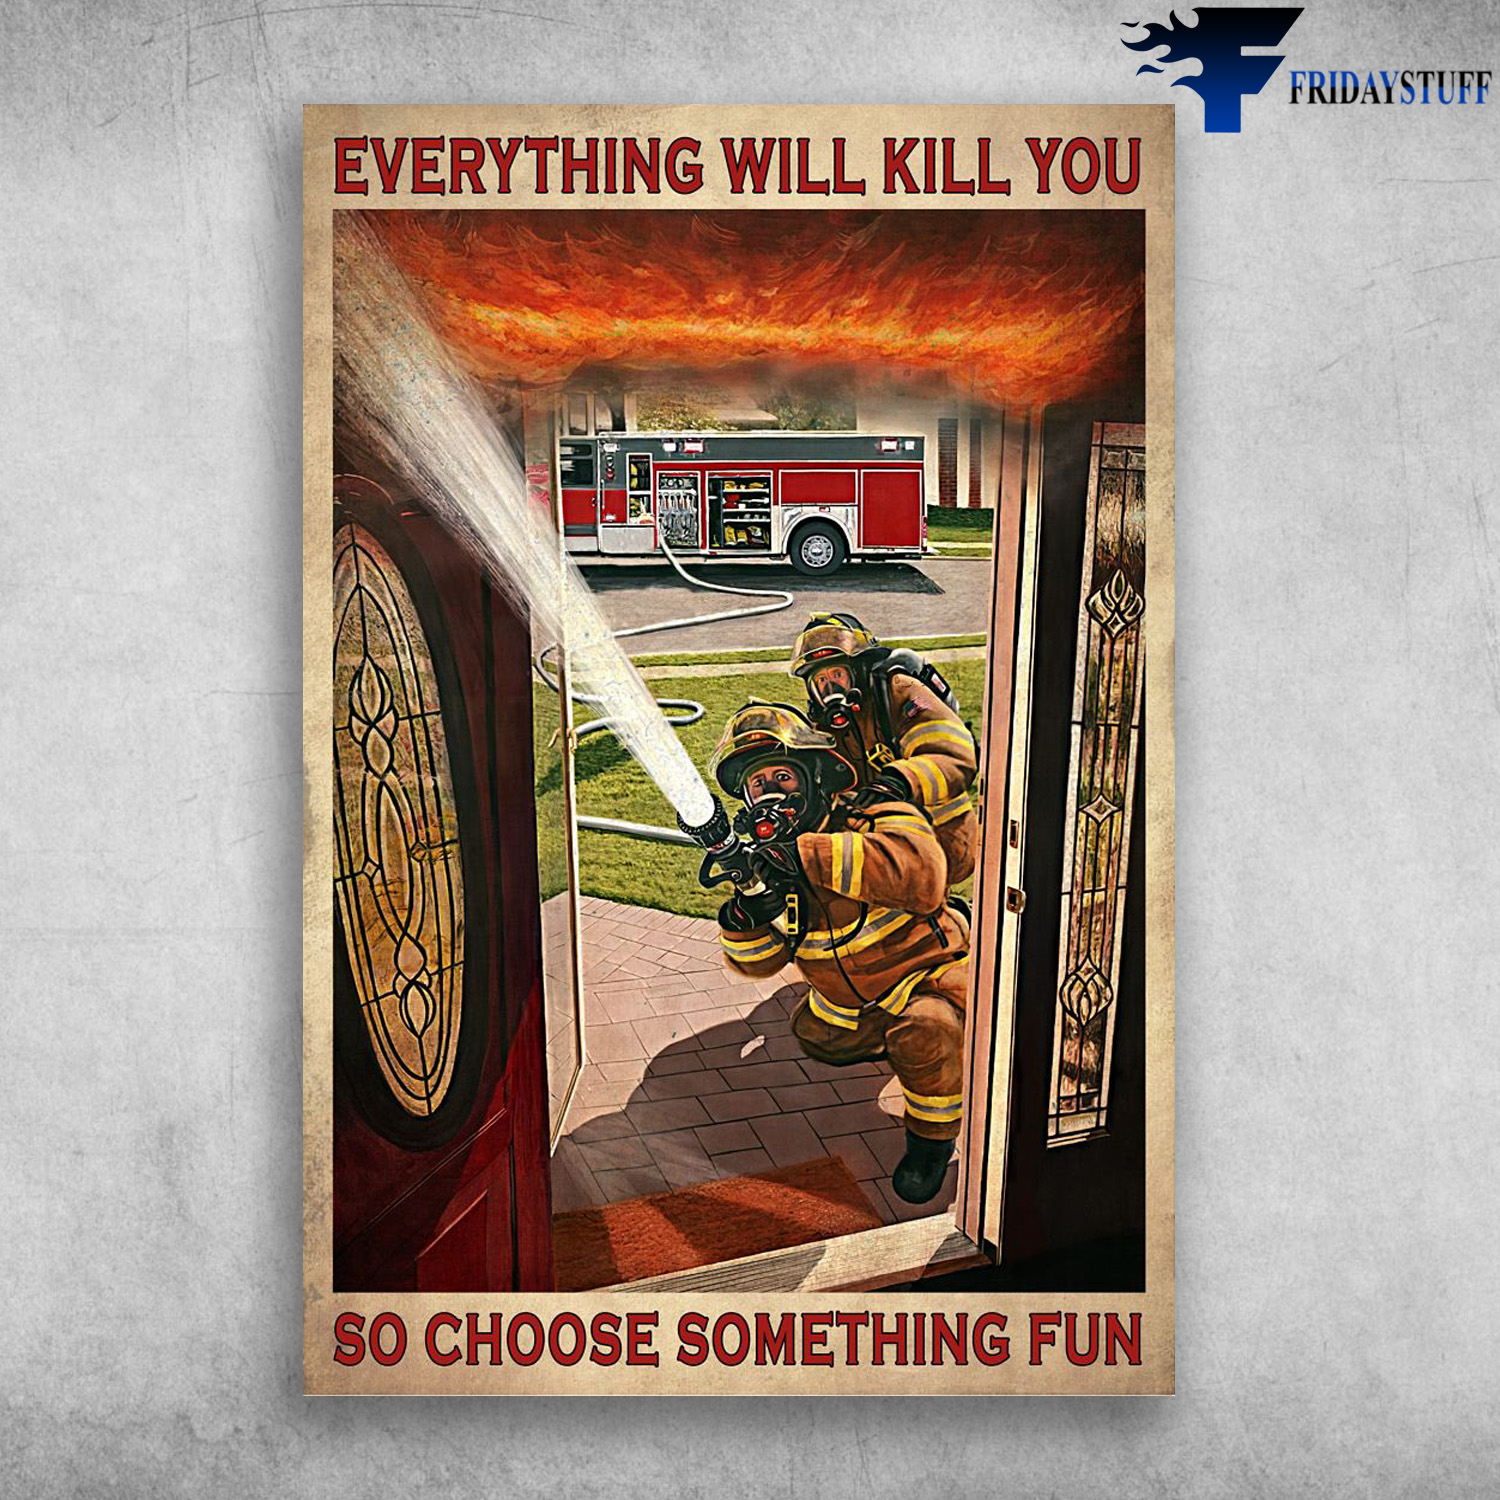 Firefighter On Work - Everything Will Kill You, So Choose Something Fun